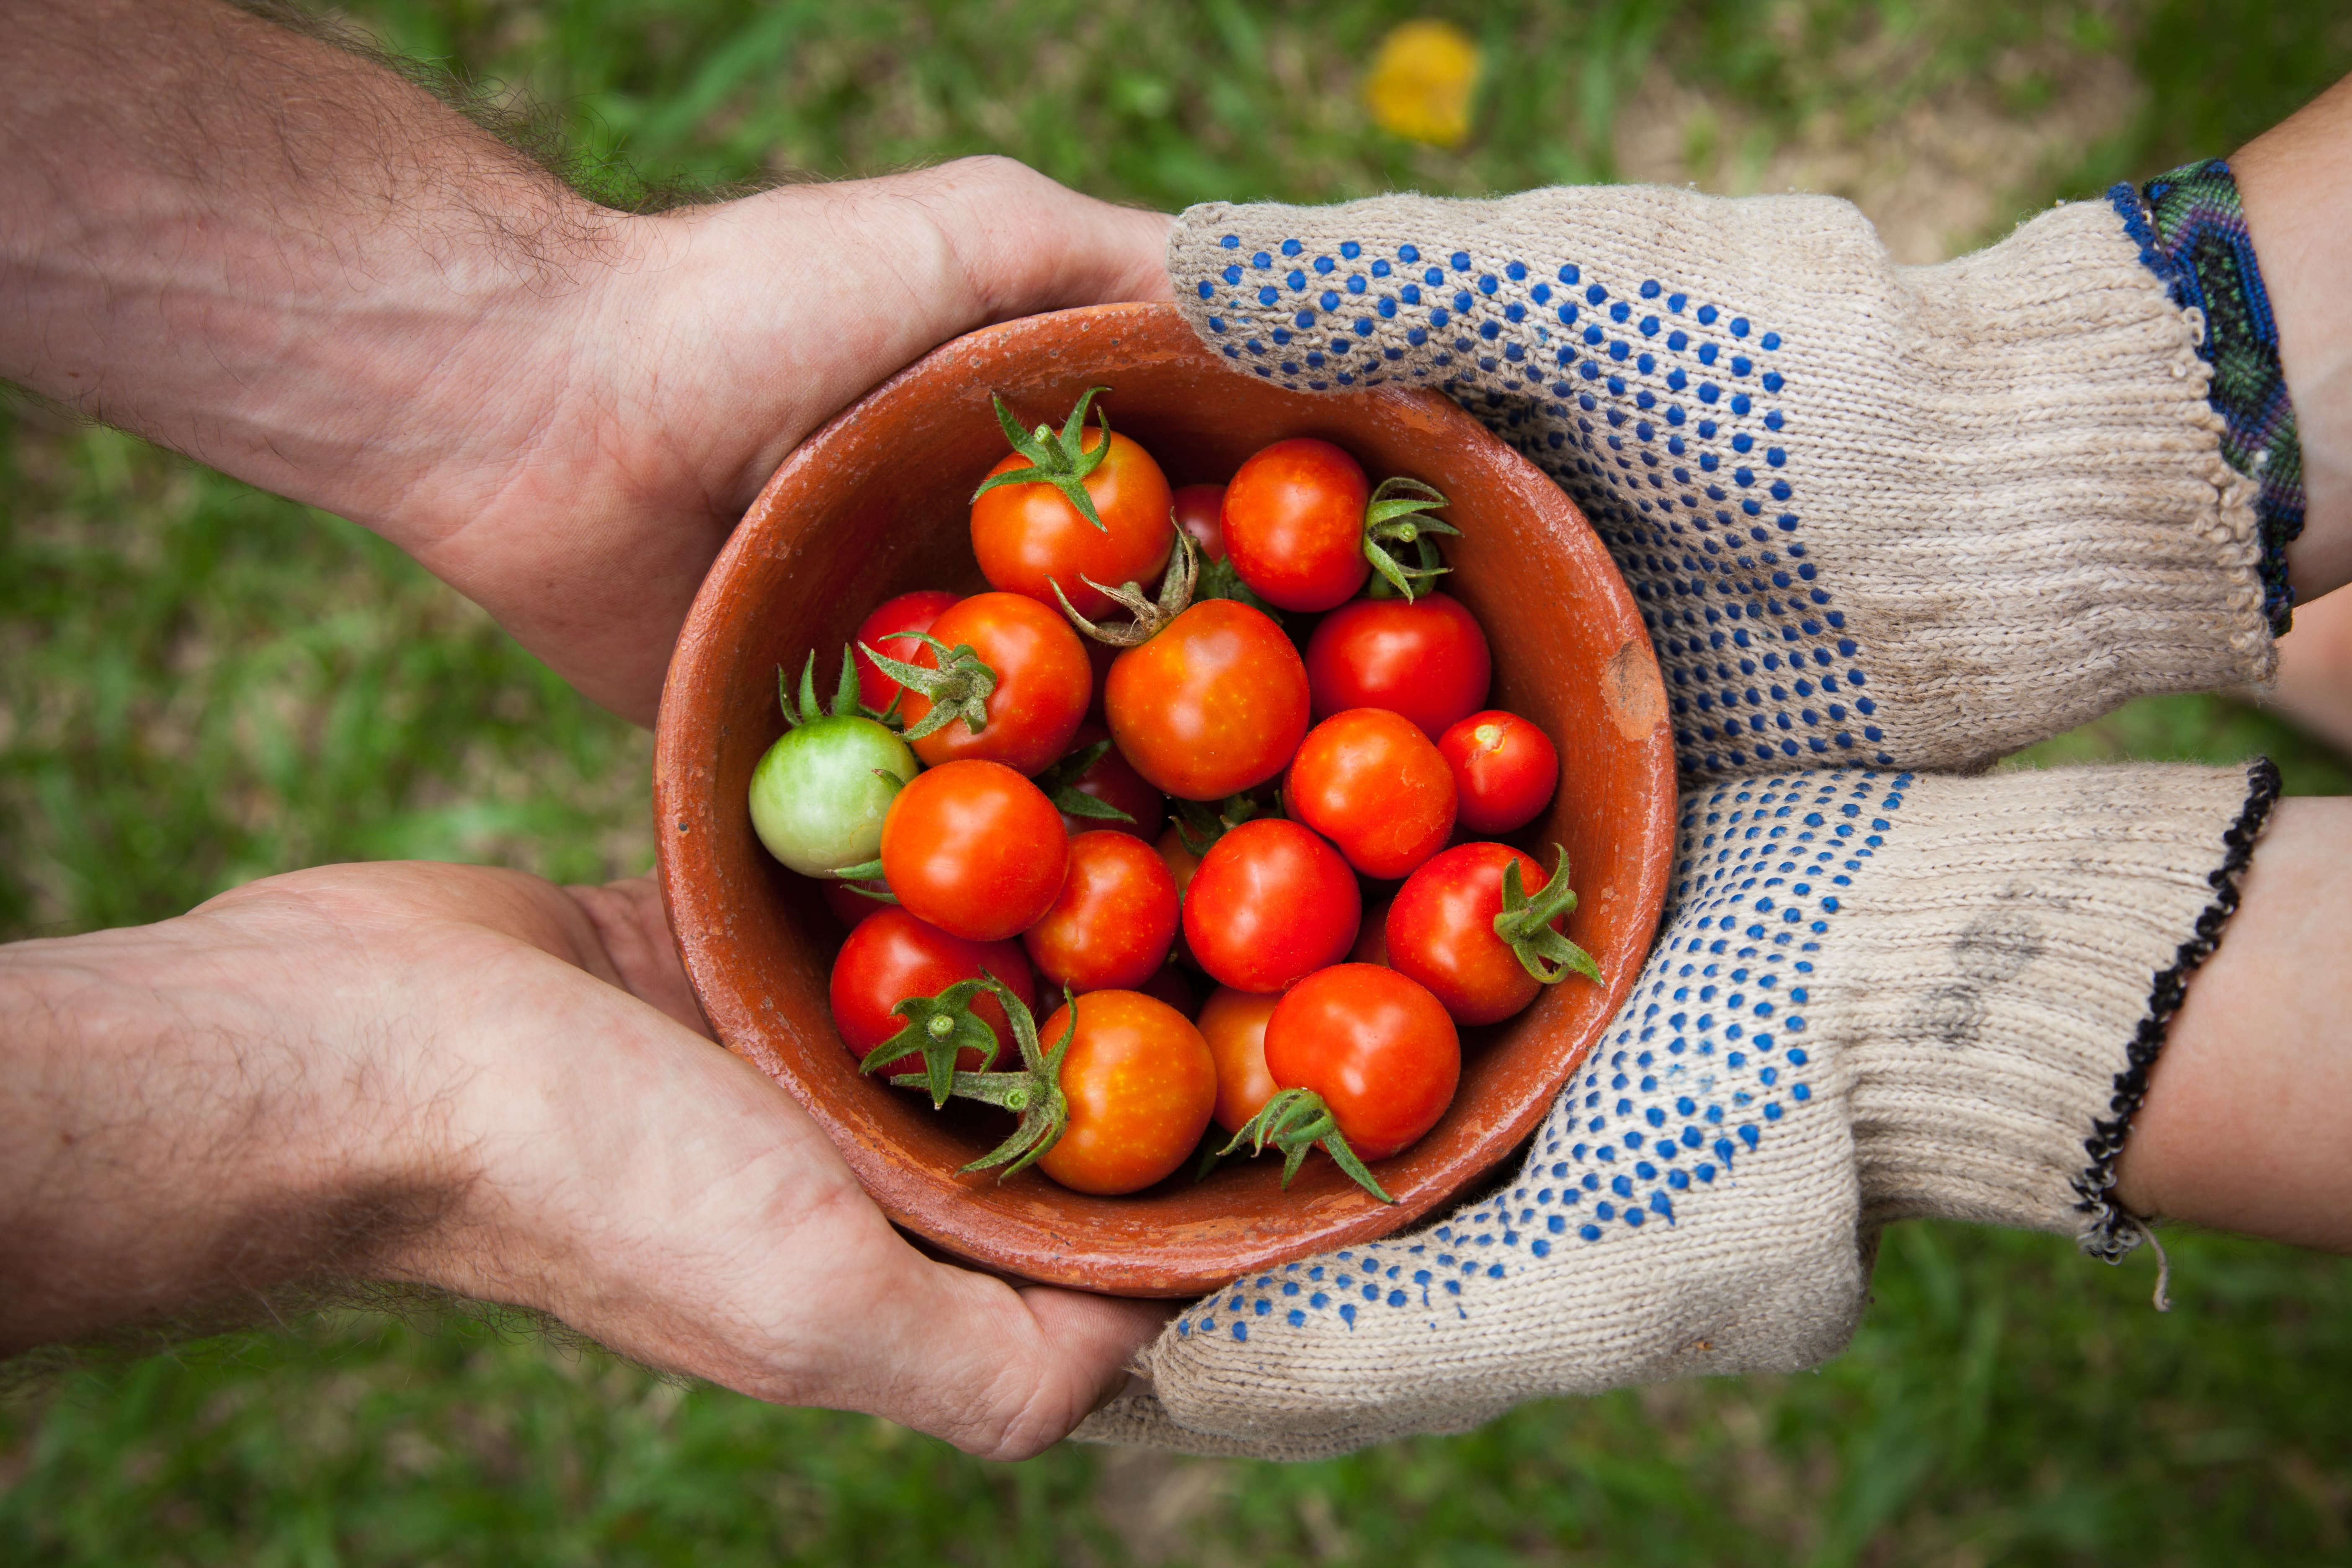 A farmer passes a bowl of ripe, bright red tomatoes to a customer.